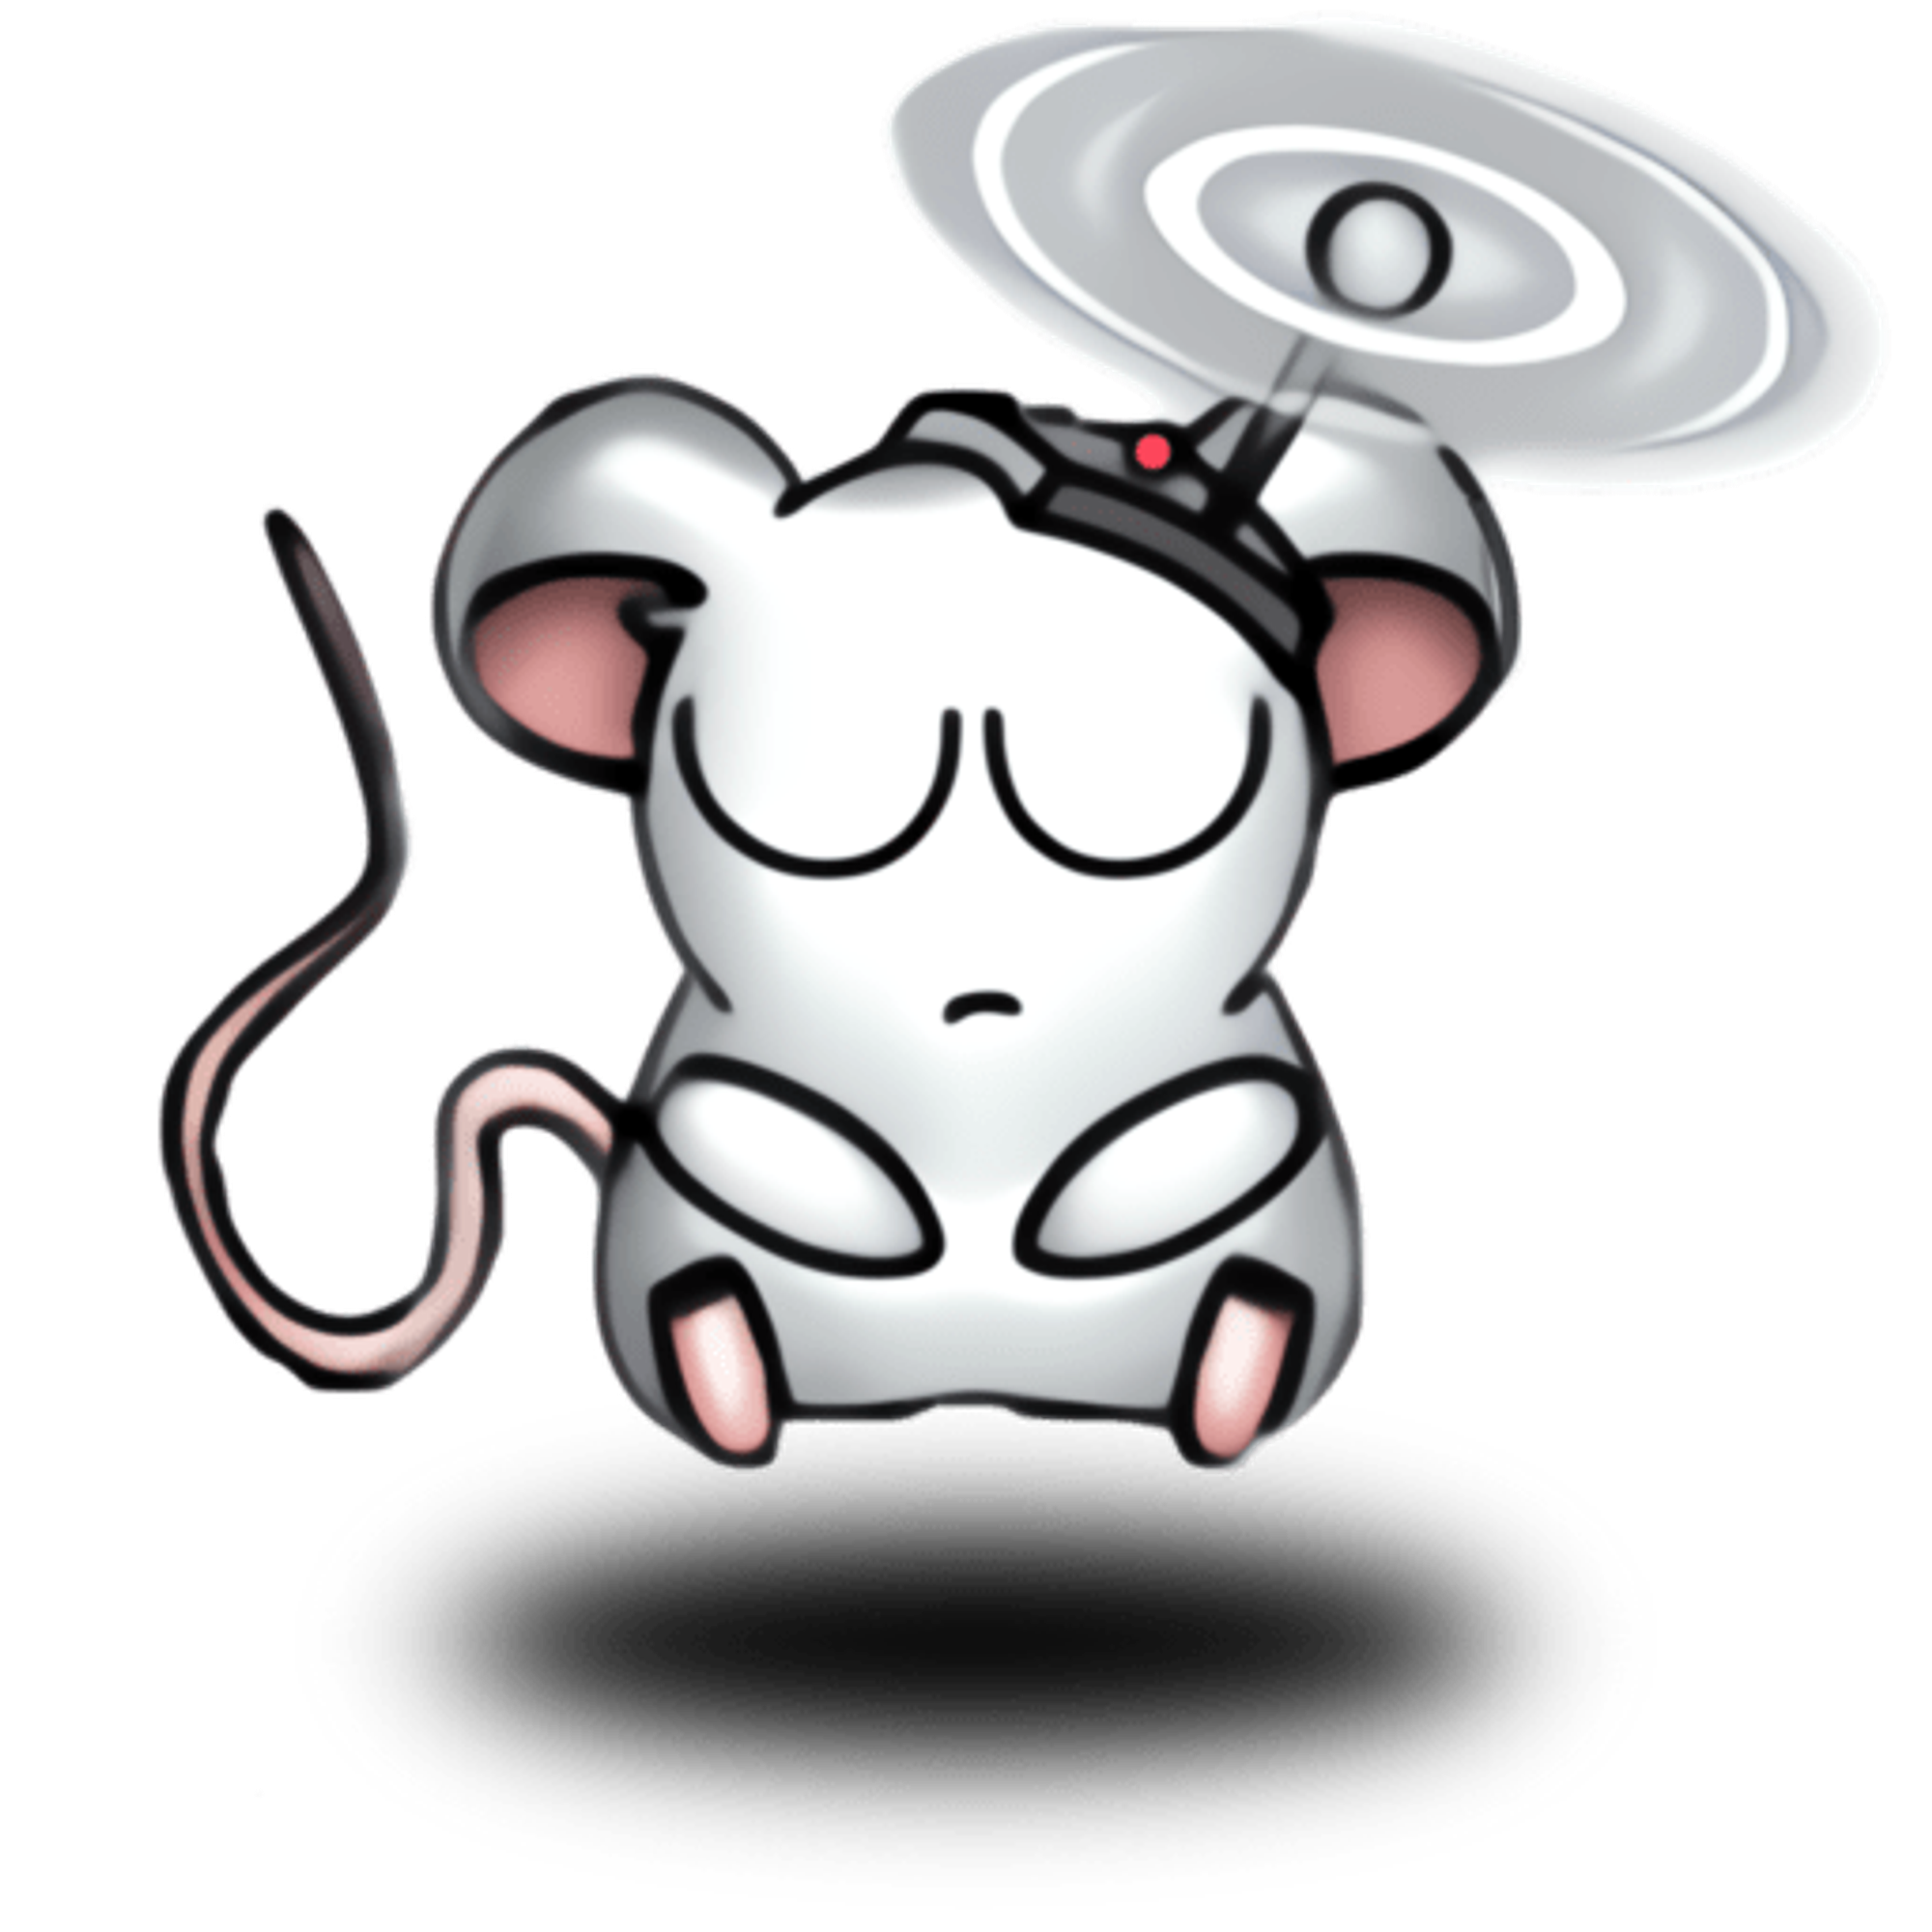 SteadyMouse - Tremor Reducing Mouse Software